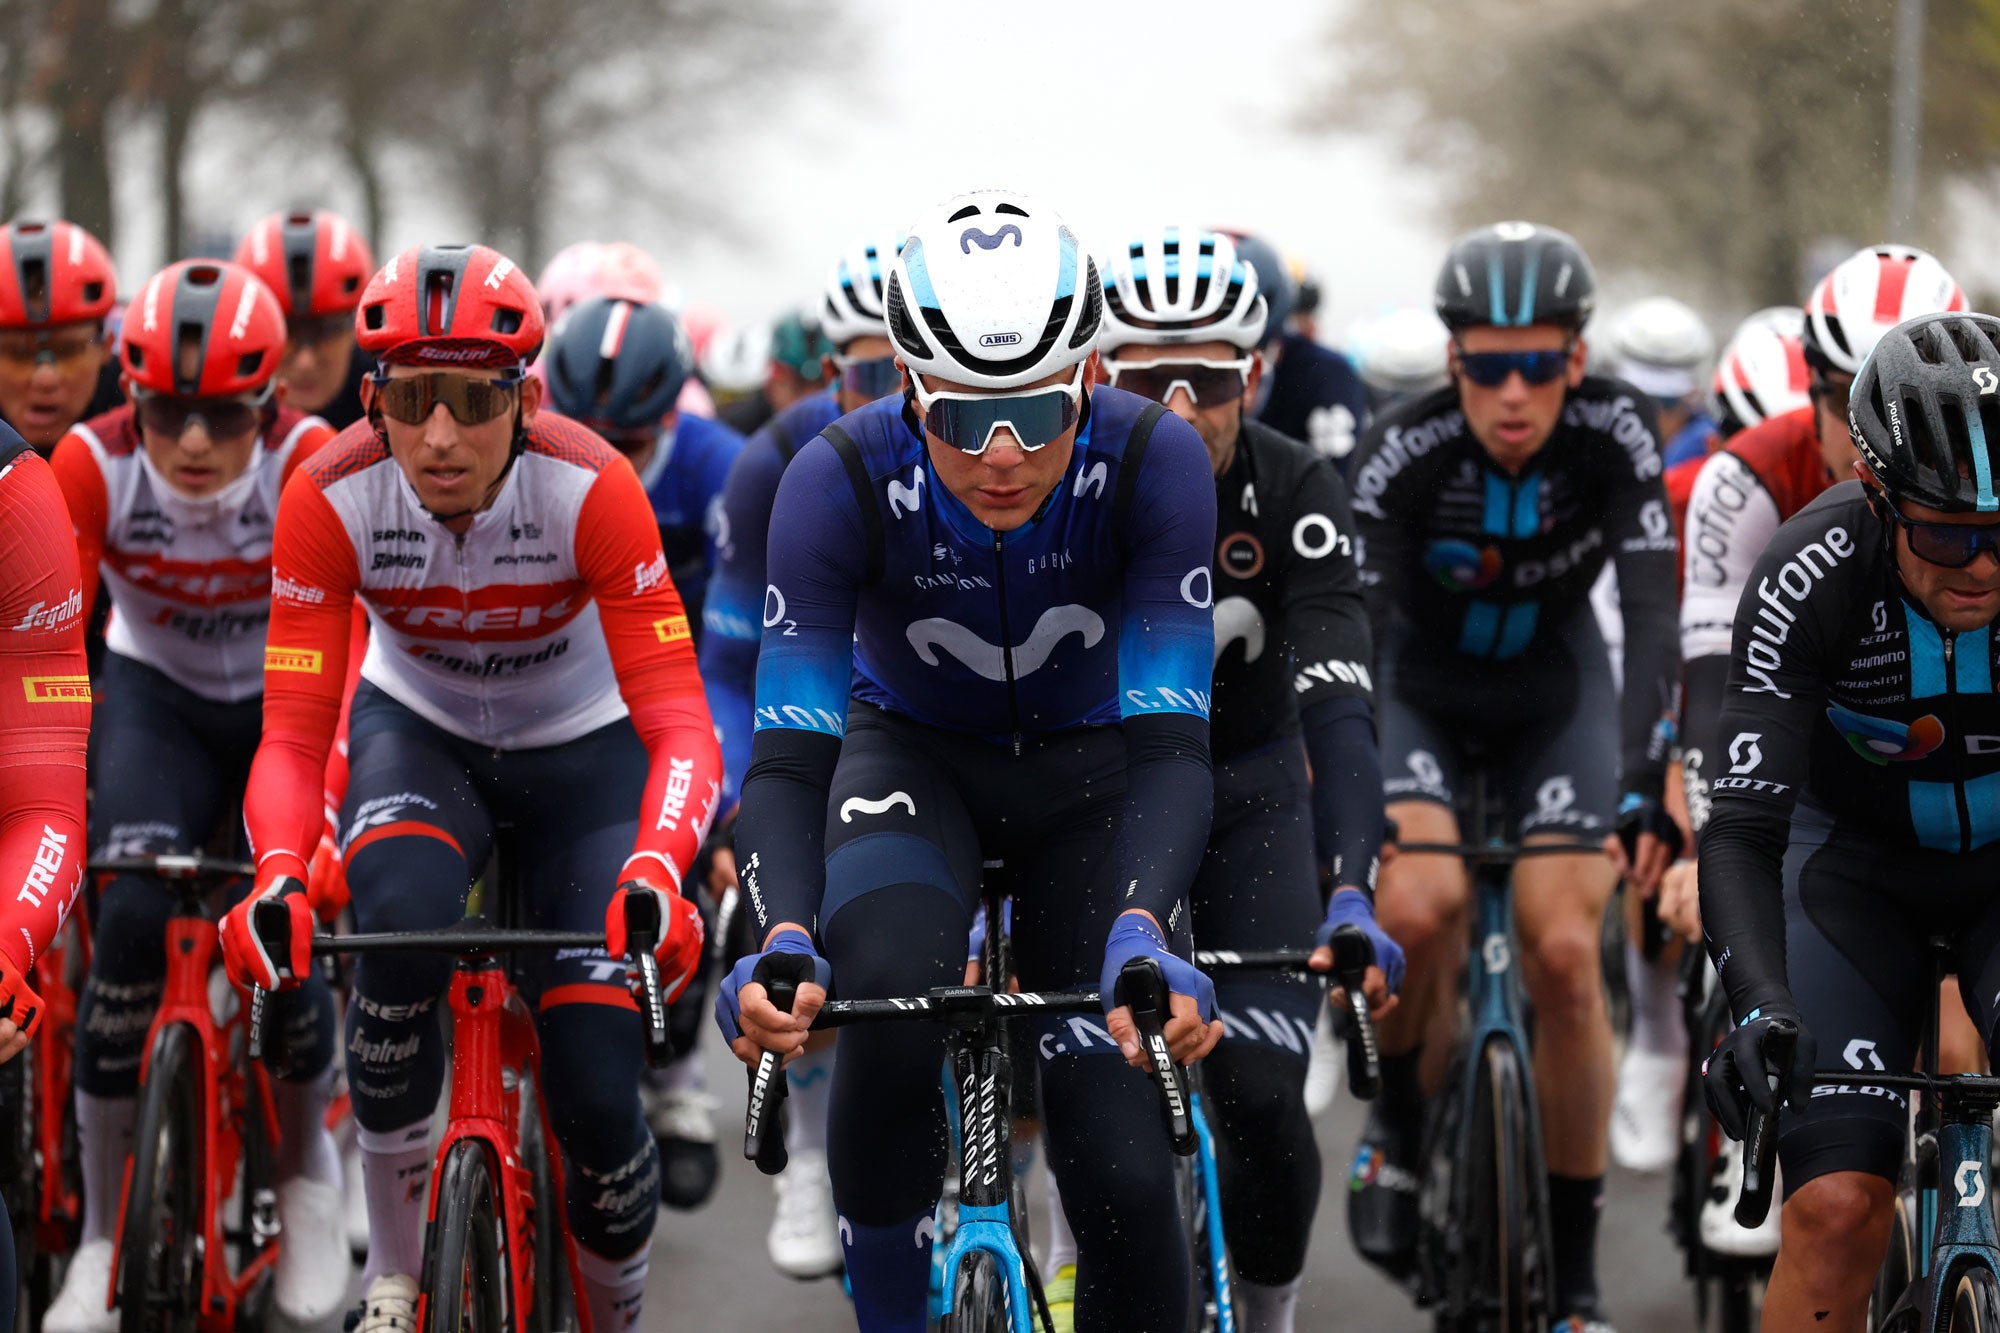 Movistar Team leading the pack in the Amstel Gold Race